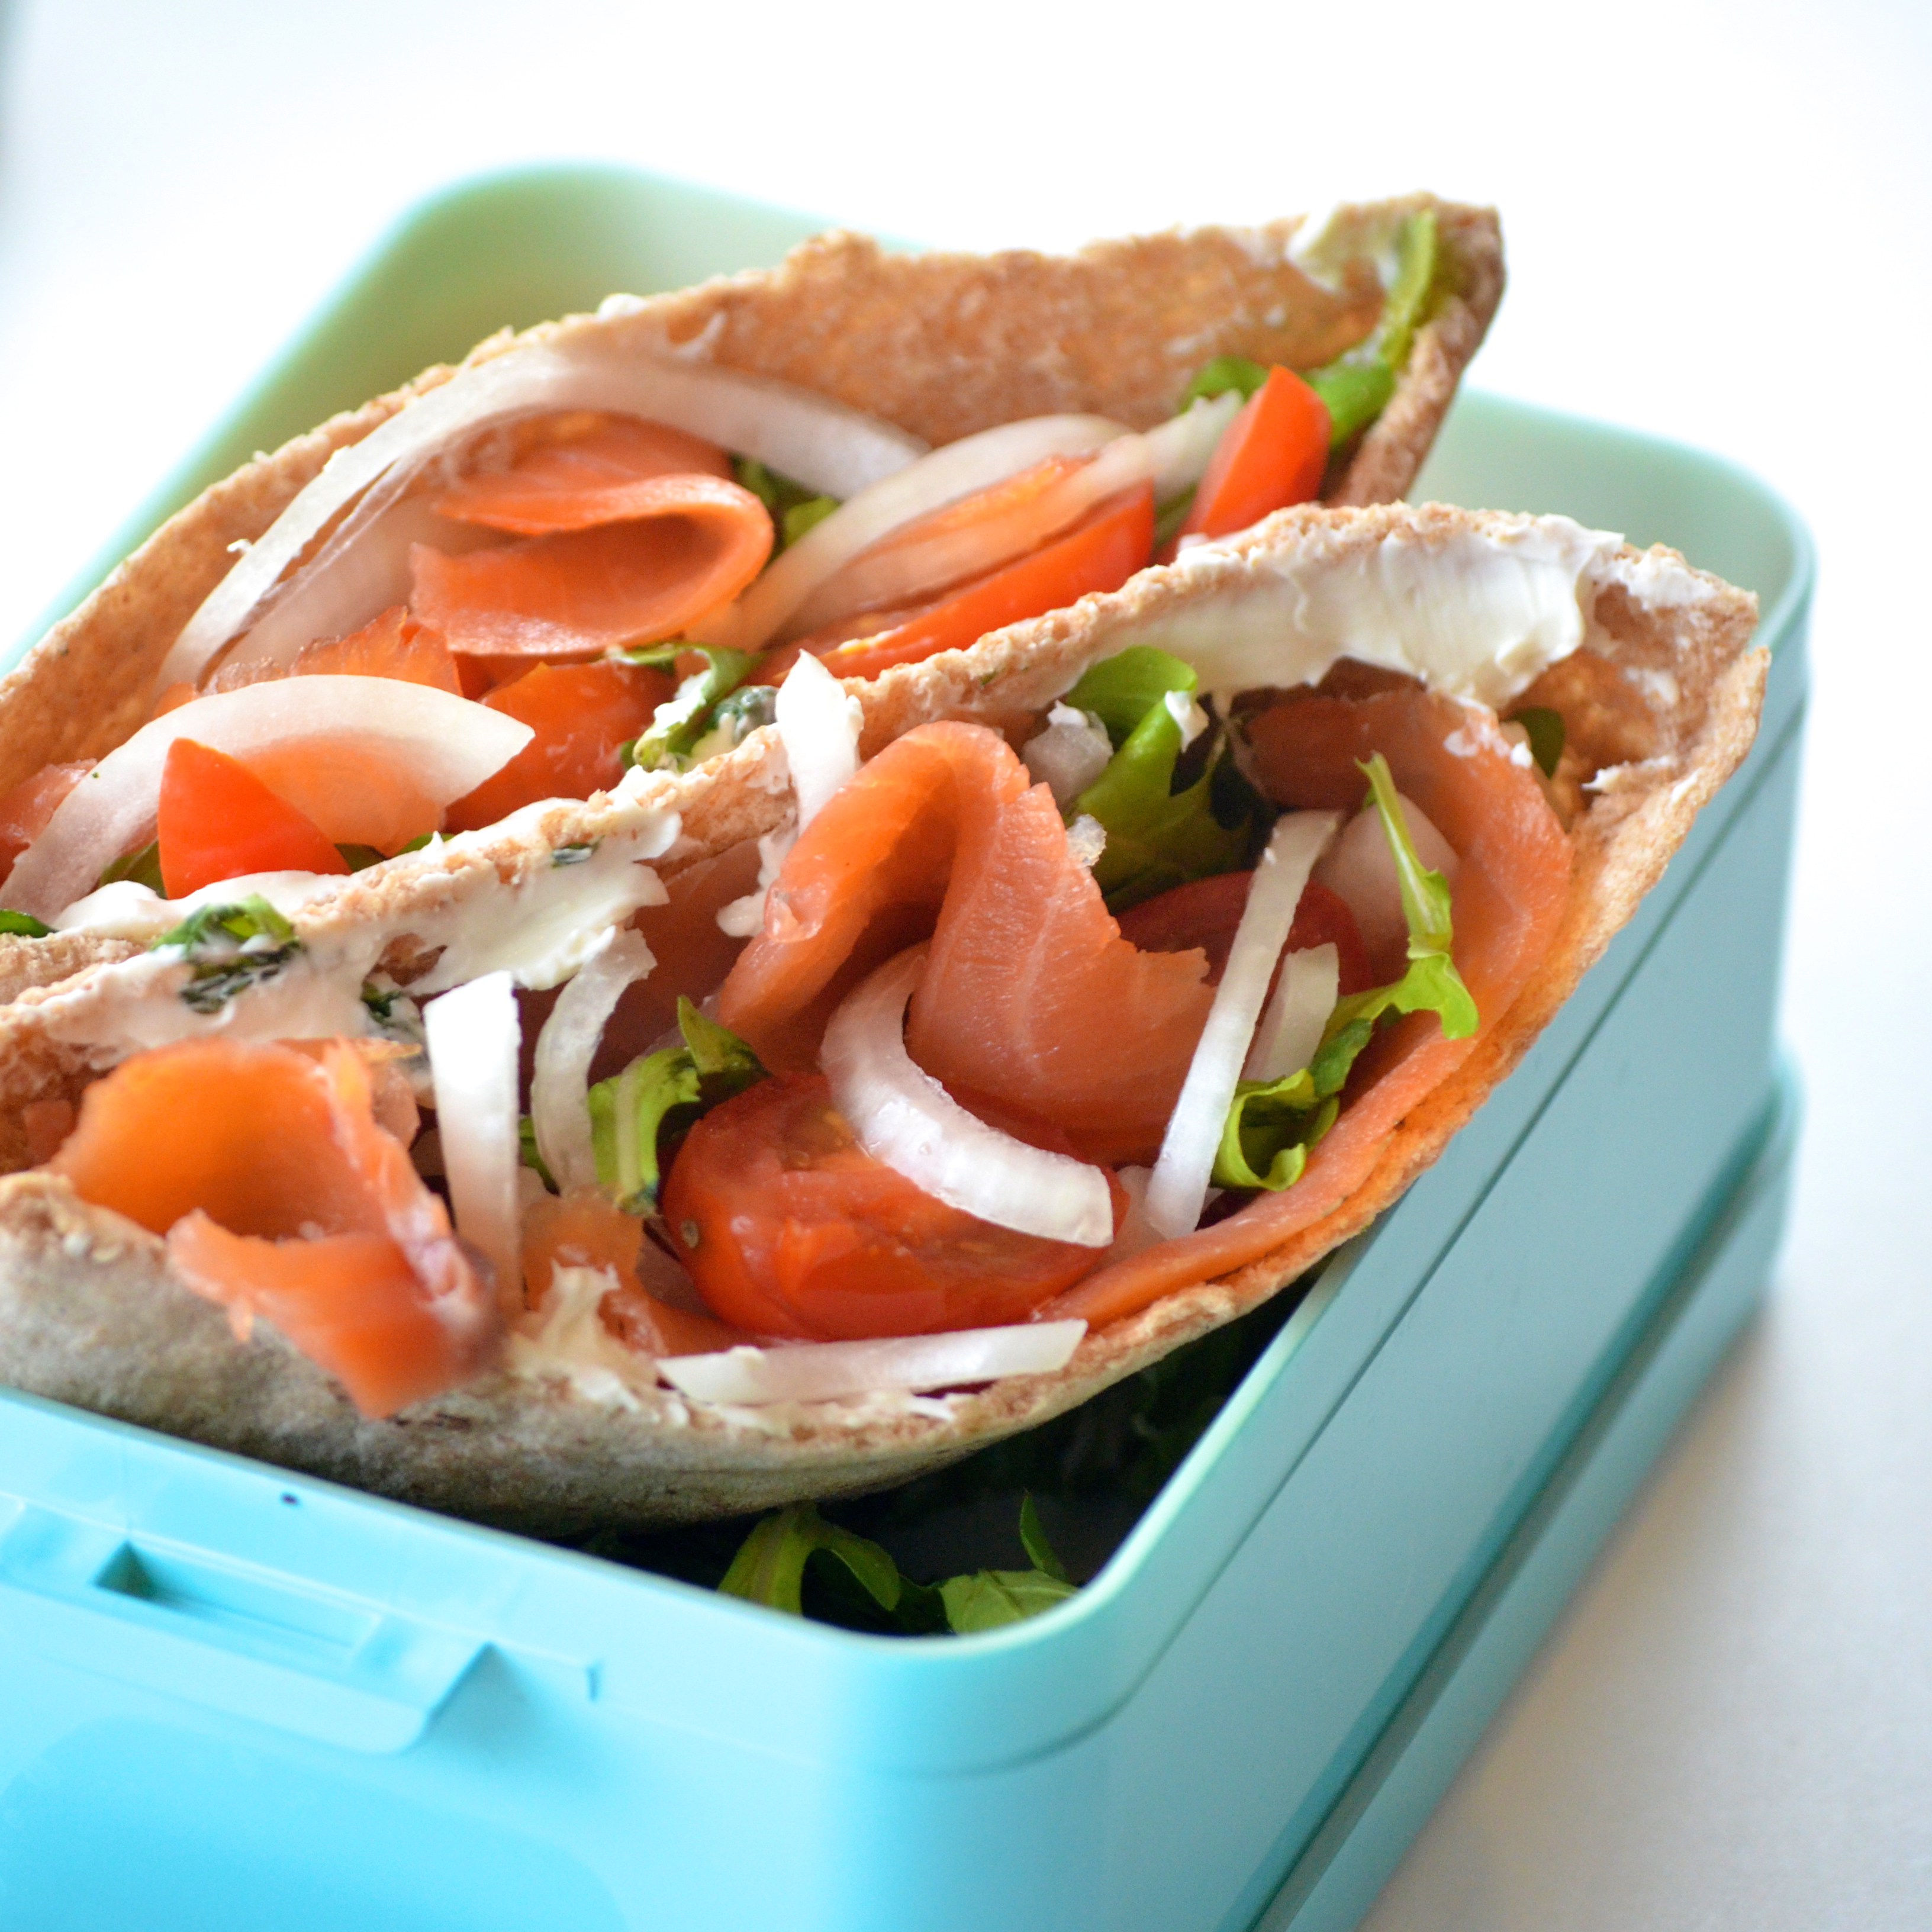 Smoked-Salmon-and-Arugula-Pita-Sandwiches-A-quick-healthy-and-delicious-lunch3